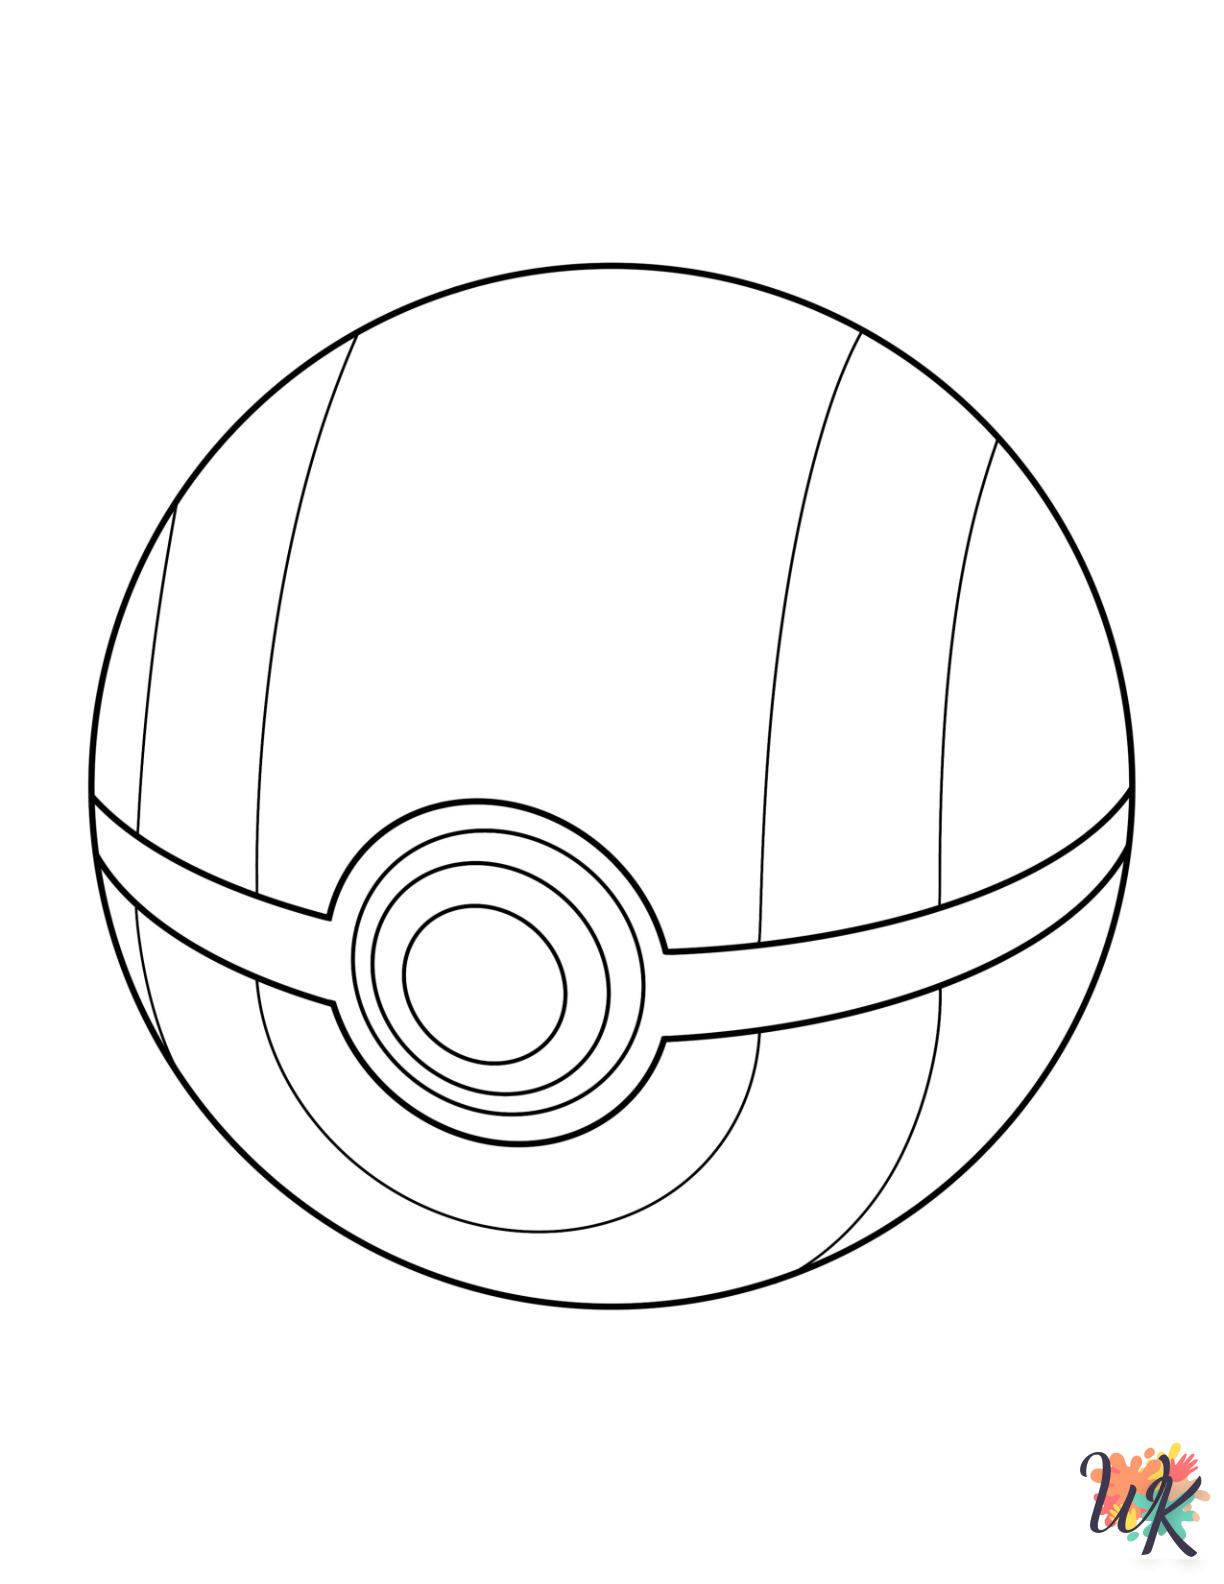 easy Pokeball coloring pages